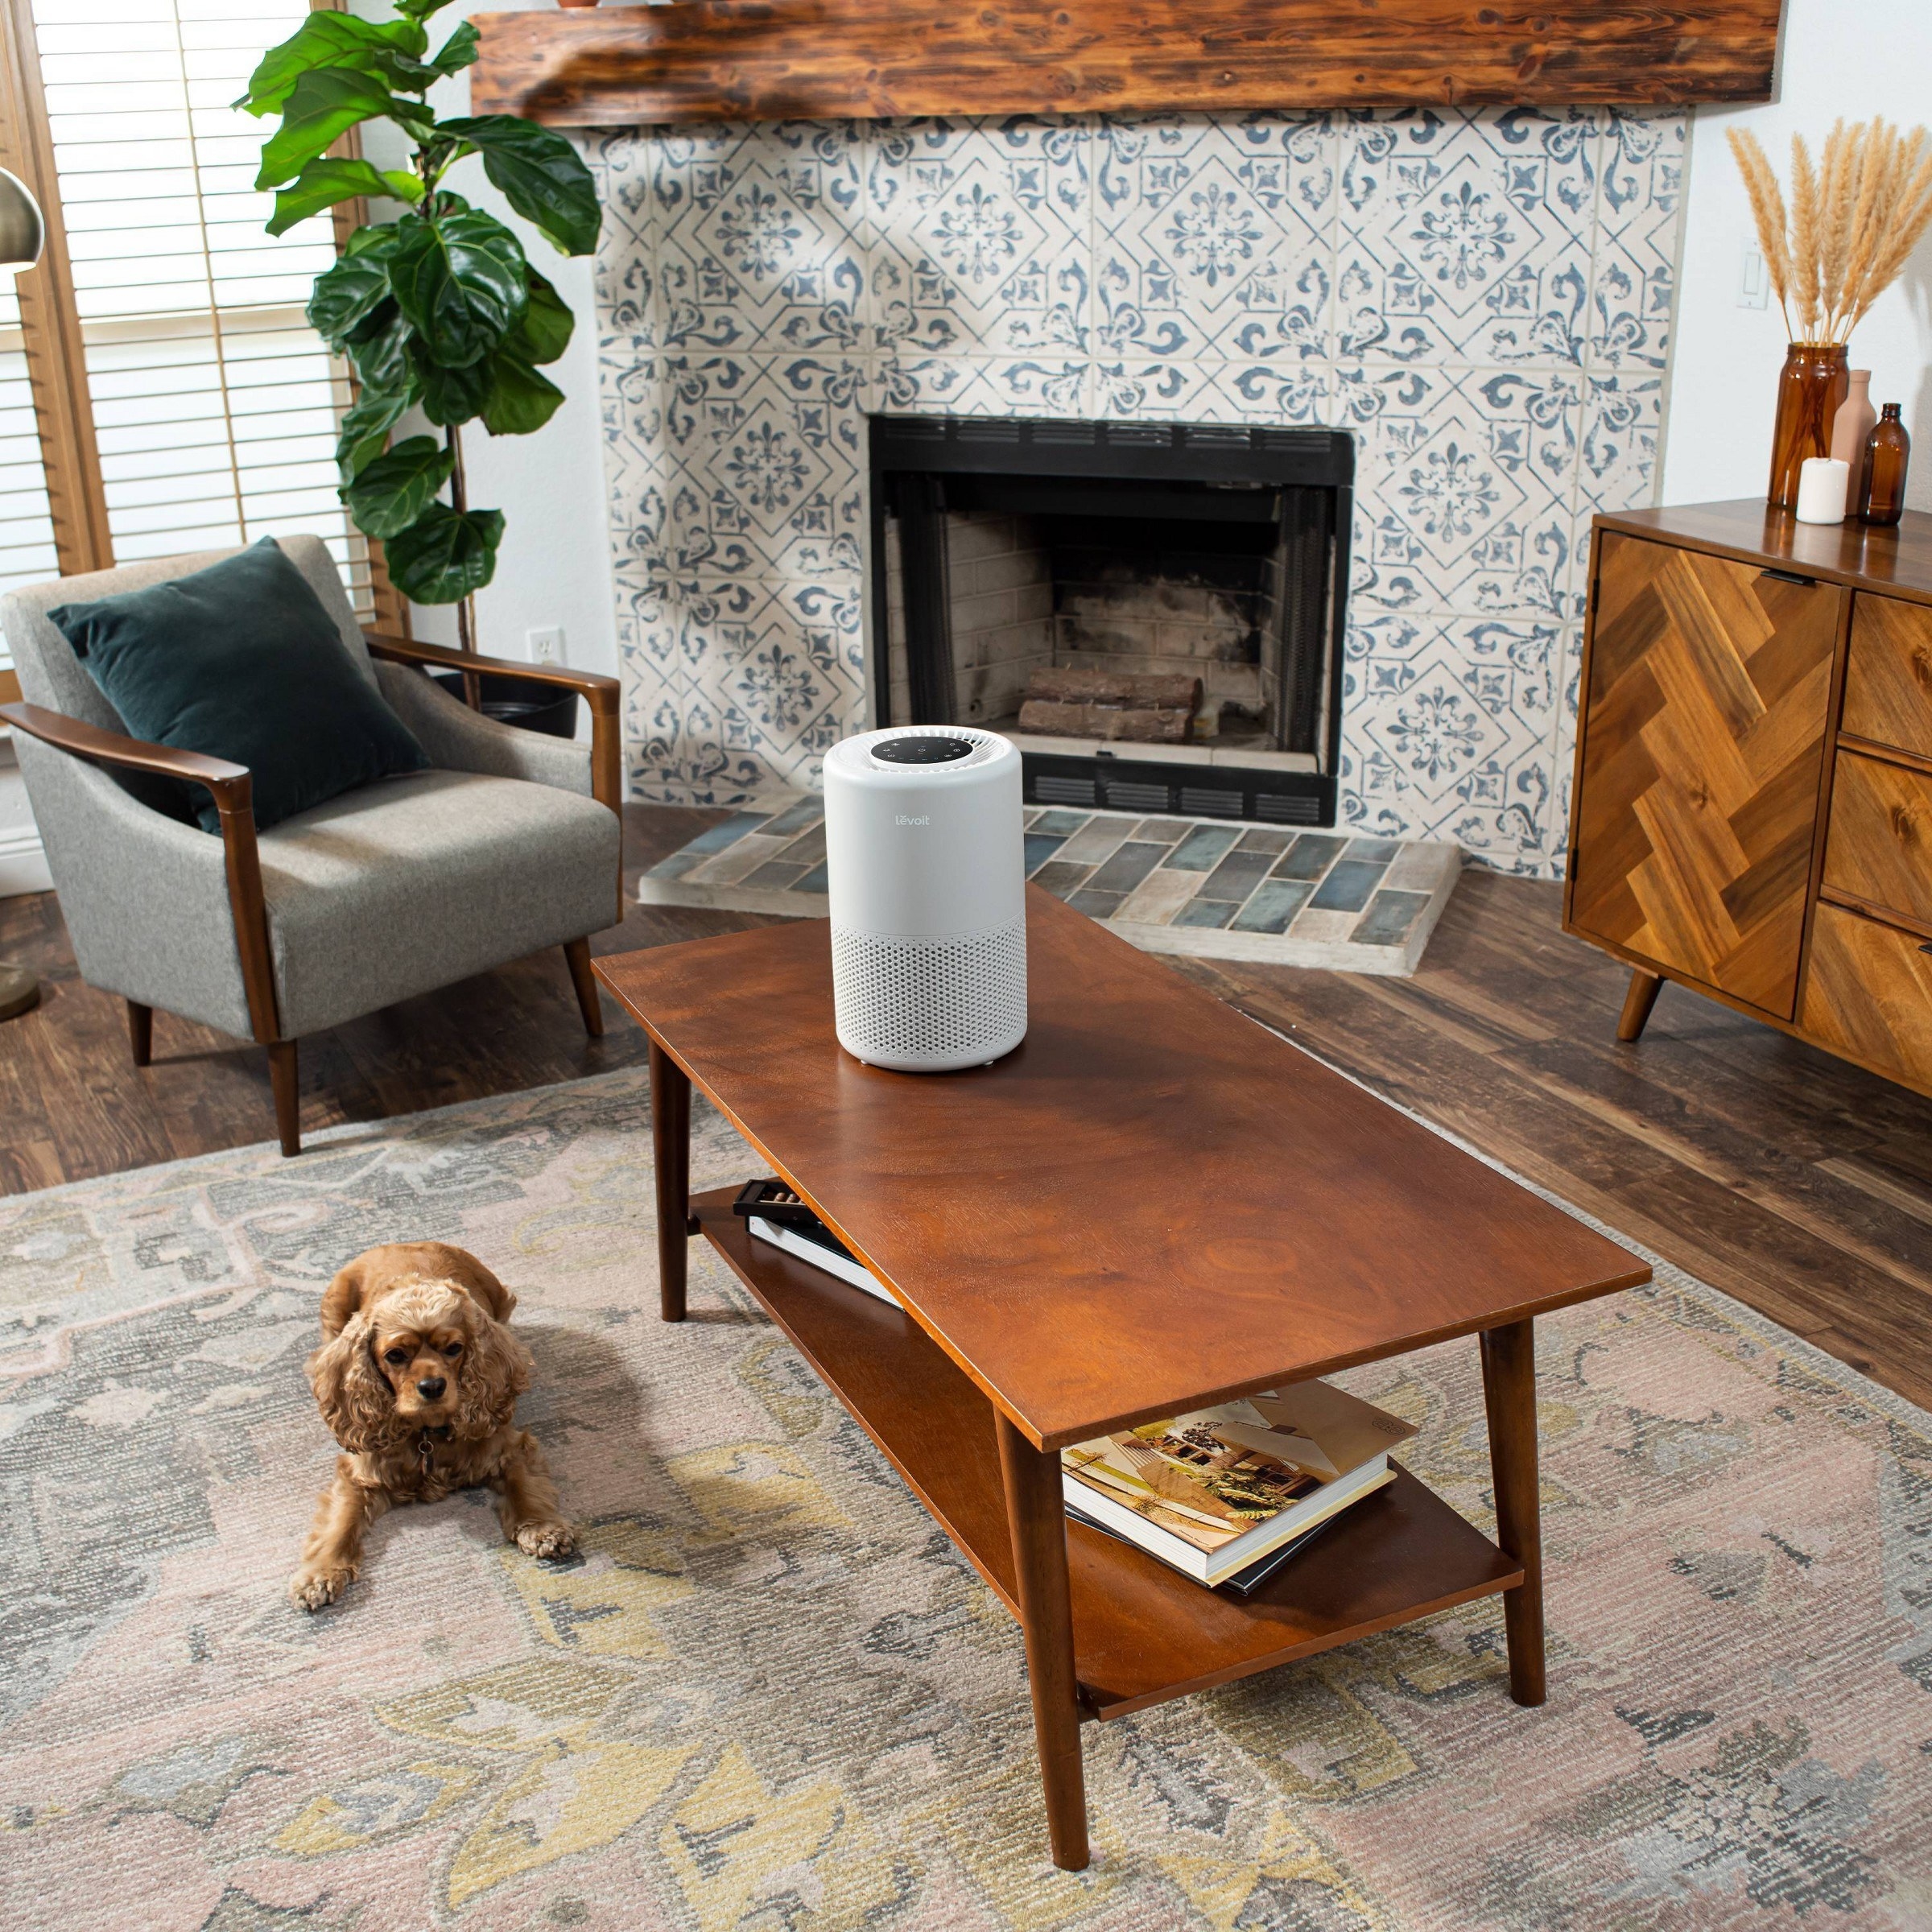 the white air purifier on a living room table next to a cocker spaniel